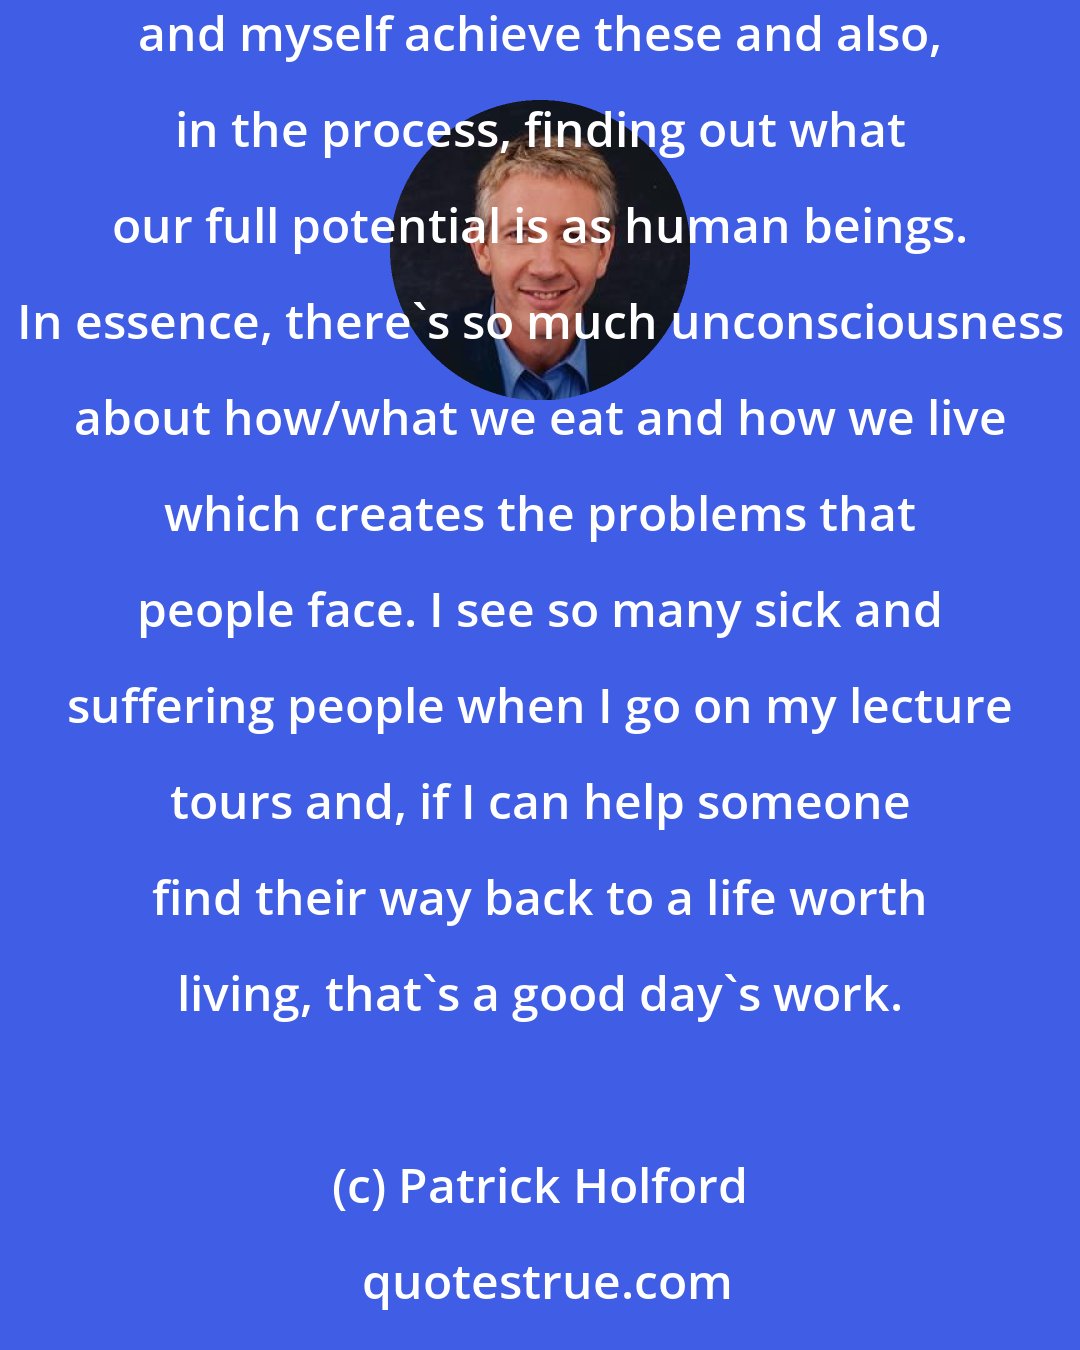 Patrick Holford: The Dalai Lama once said that every human being has two fundamental desires: to be happy and free of pain. I'm interested both in helping people and myself achieve these and also, in the process, finding out what our full potential is as human beings. In essence, there's so much unconsciousness about how/what we eat and how we live which creates the problems that people face. I see so many sick and suffering people when I go on my lecture tours and, if I can help someone find their way back to a life worth living, that's a good day's work.